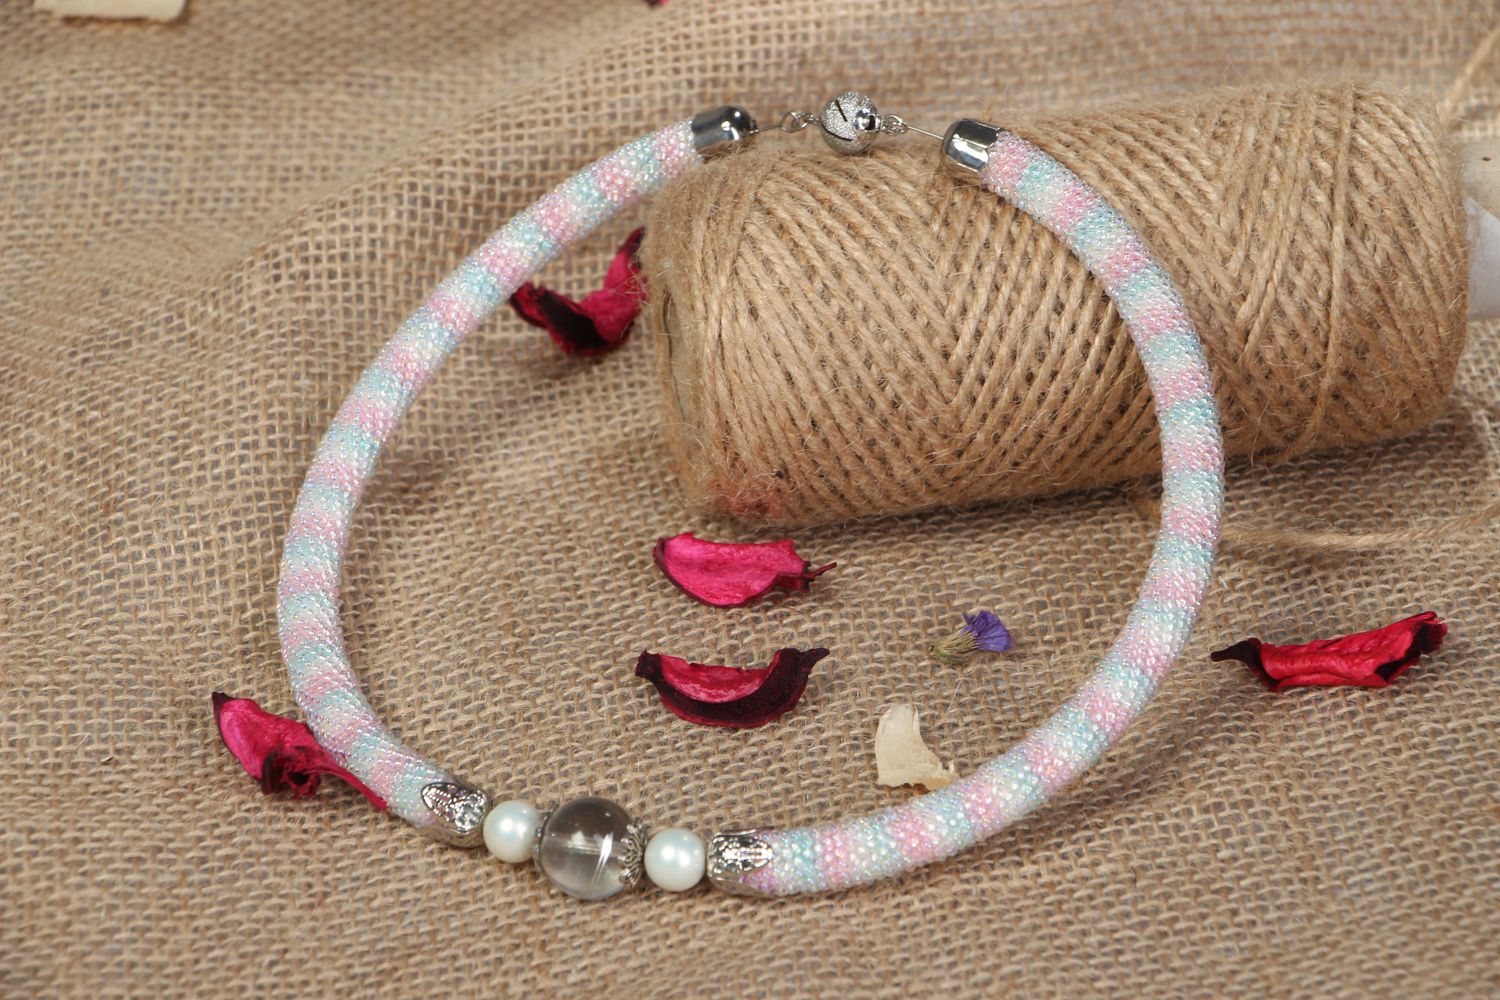 Handmade beaded cord necklace with natural stones photo 5